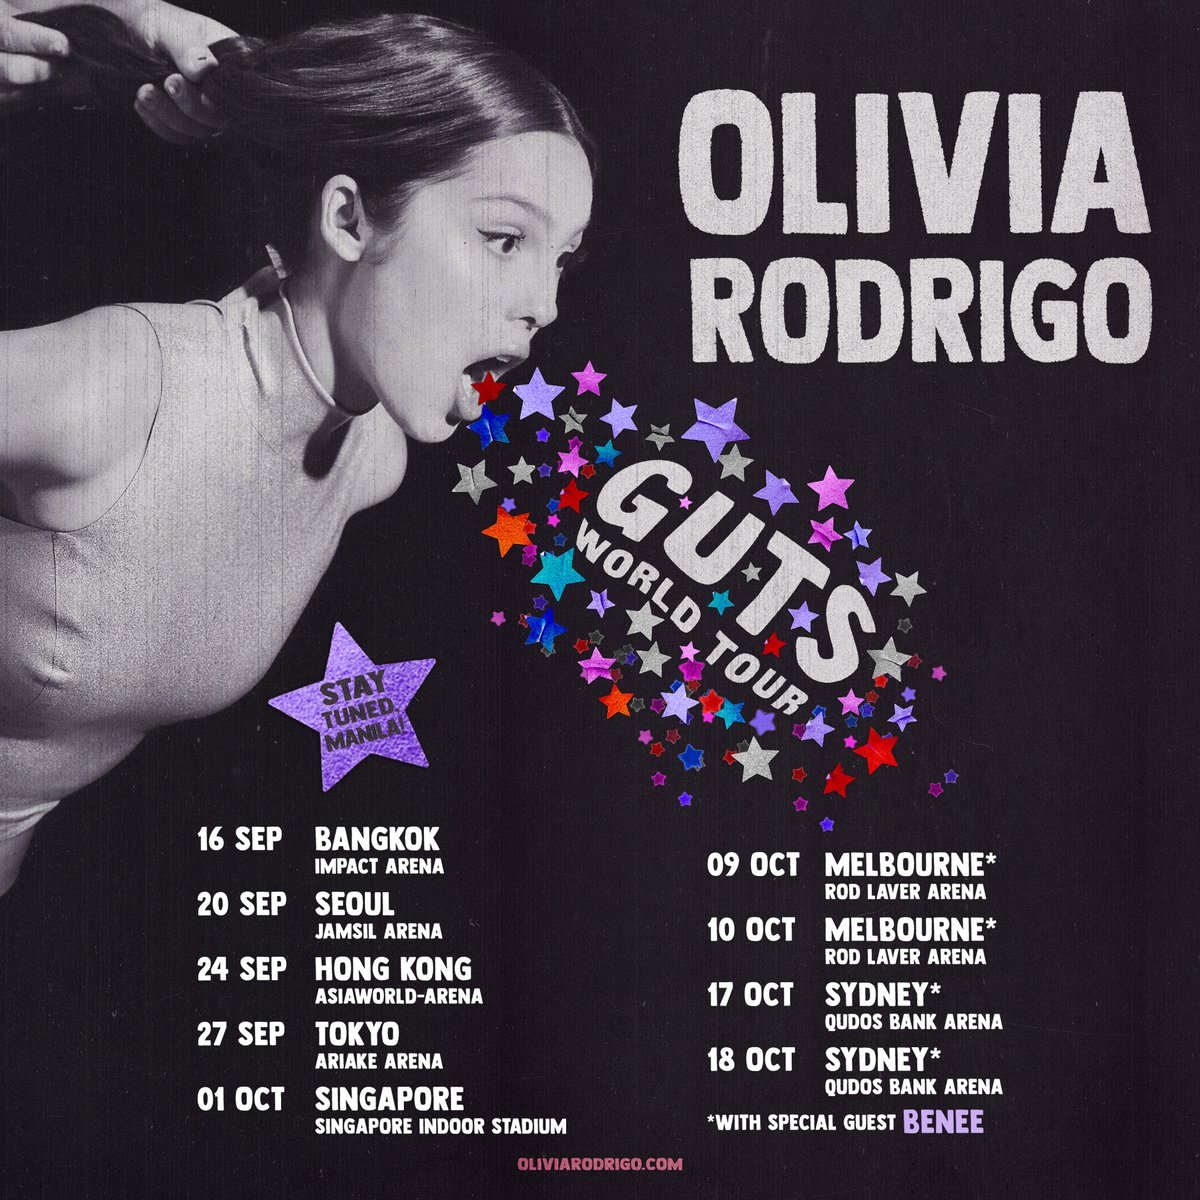 GUTS world tour Asia and Australia dates just announced!!! hope to see ya there!!!💋💋💋Get ticket details at oliviarodrigo.com